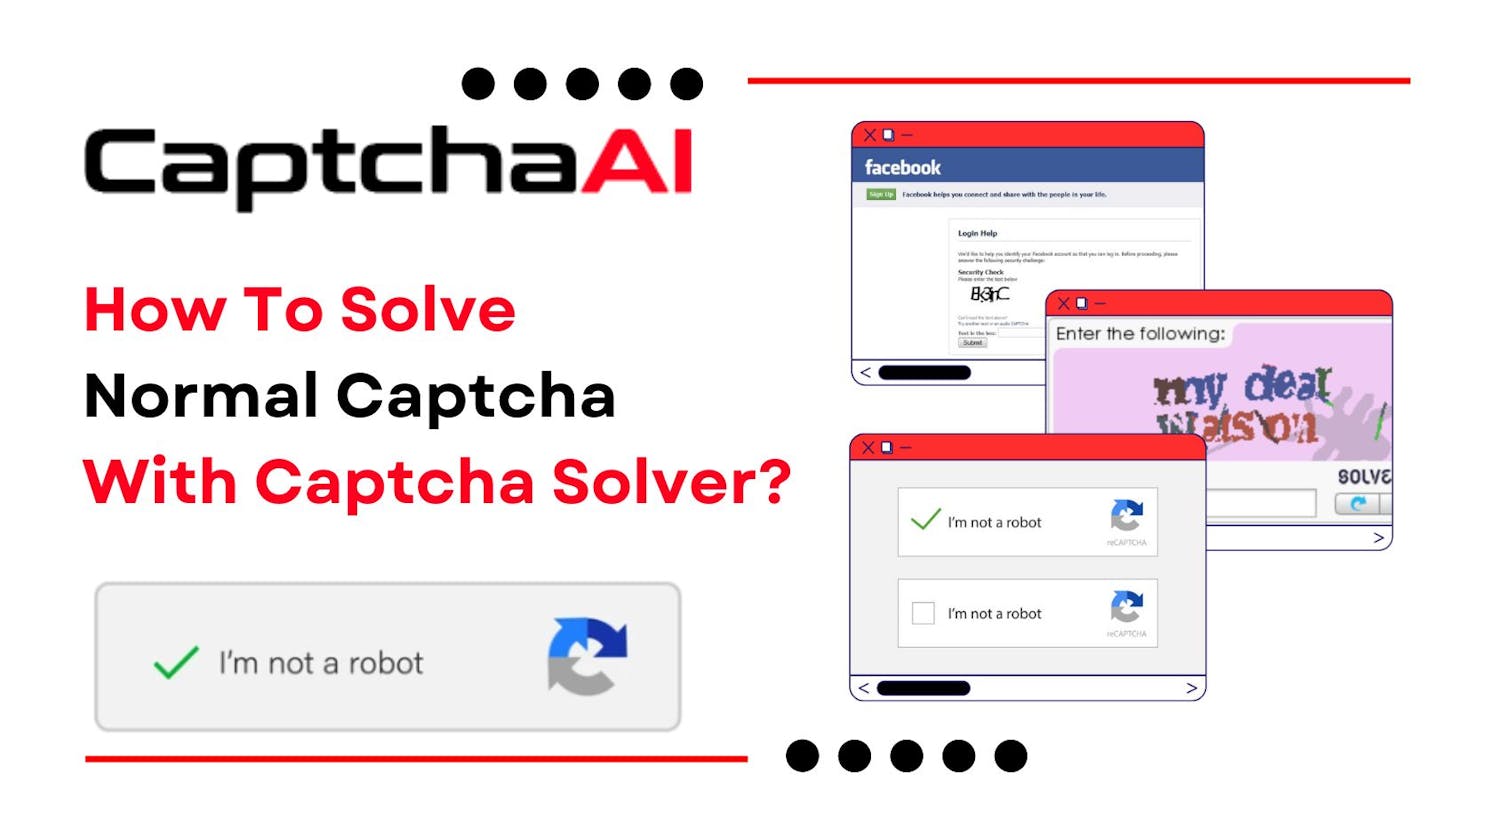 How To Solve Normal Captcha Types With Captcha Solver?